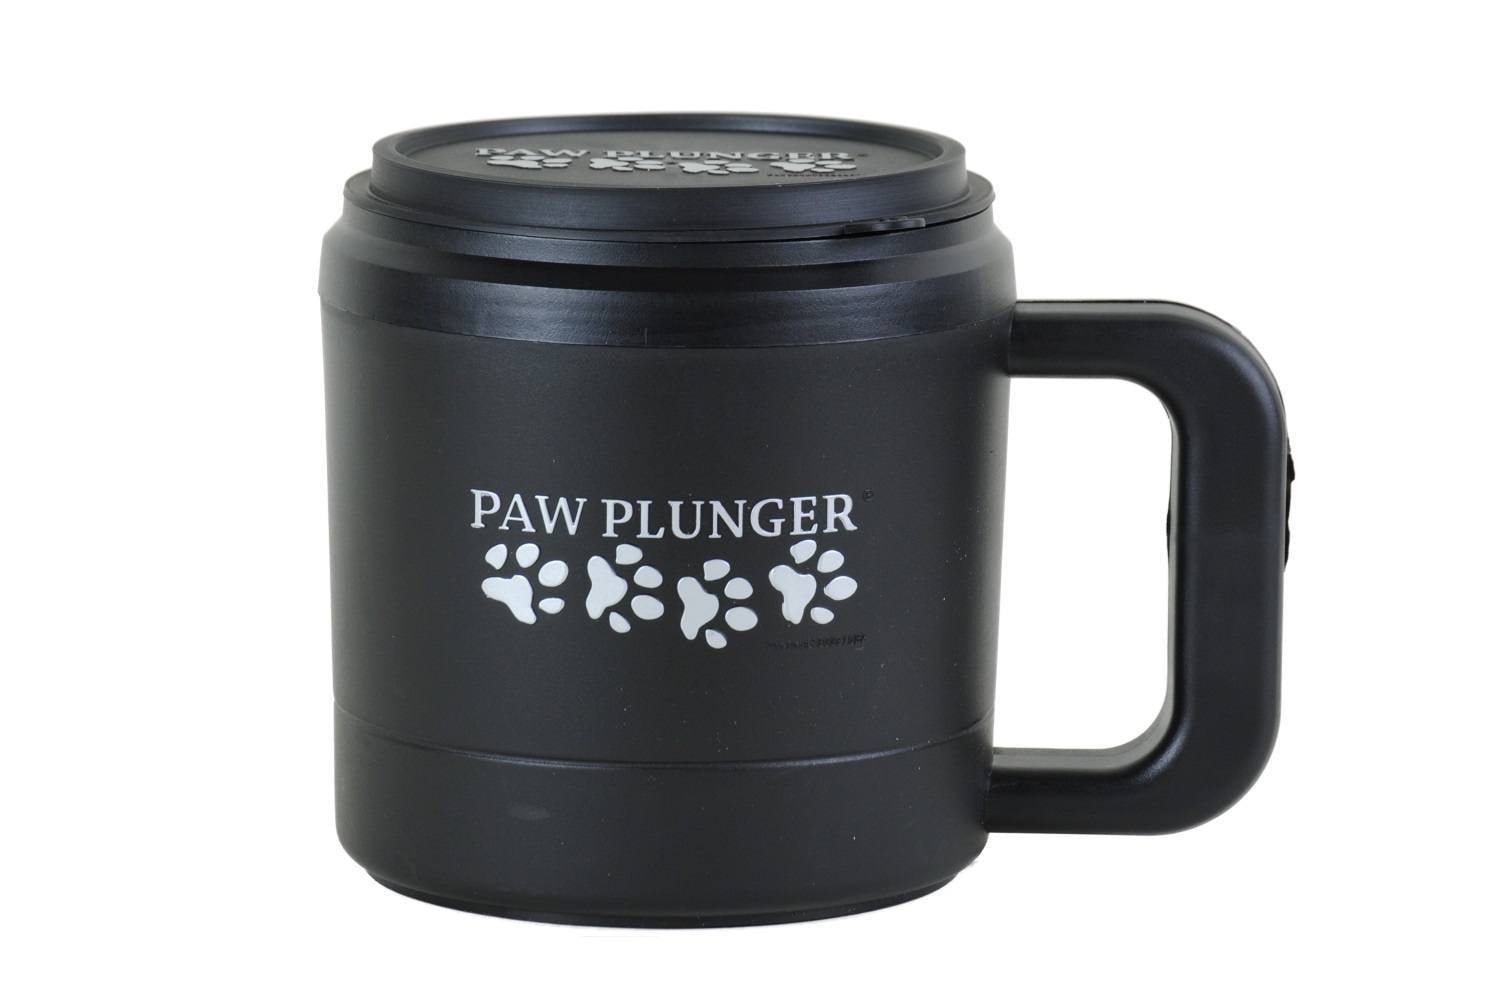 the paw plunger